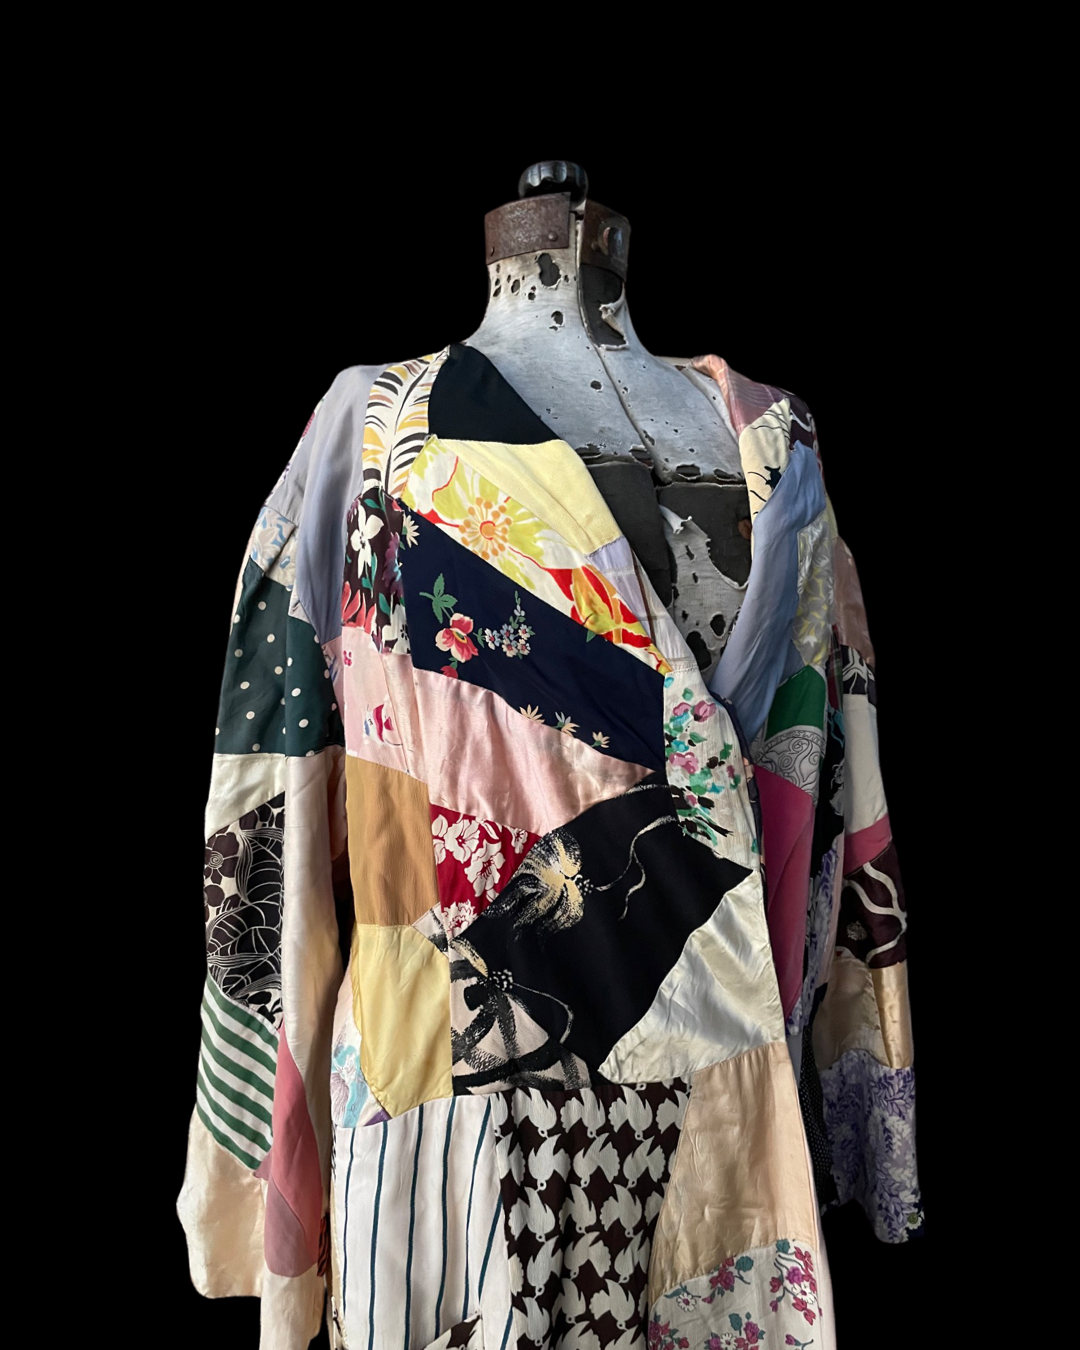 Late 1920s Handmade Silk Deco Crazy Quilt Dressing Gown